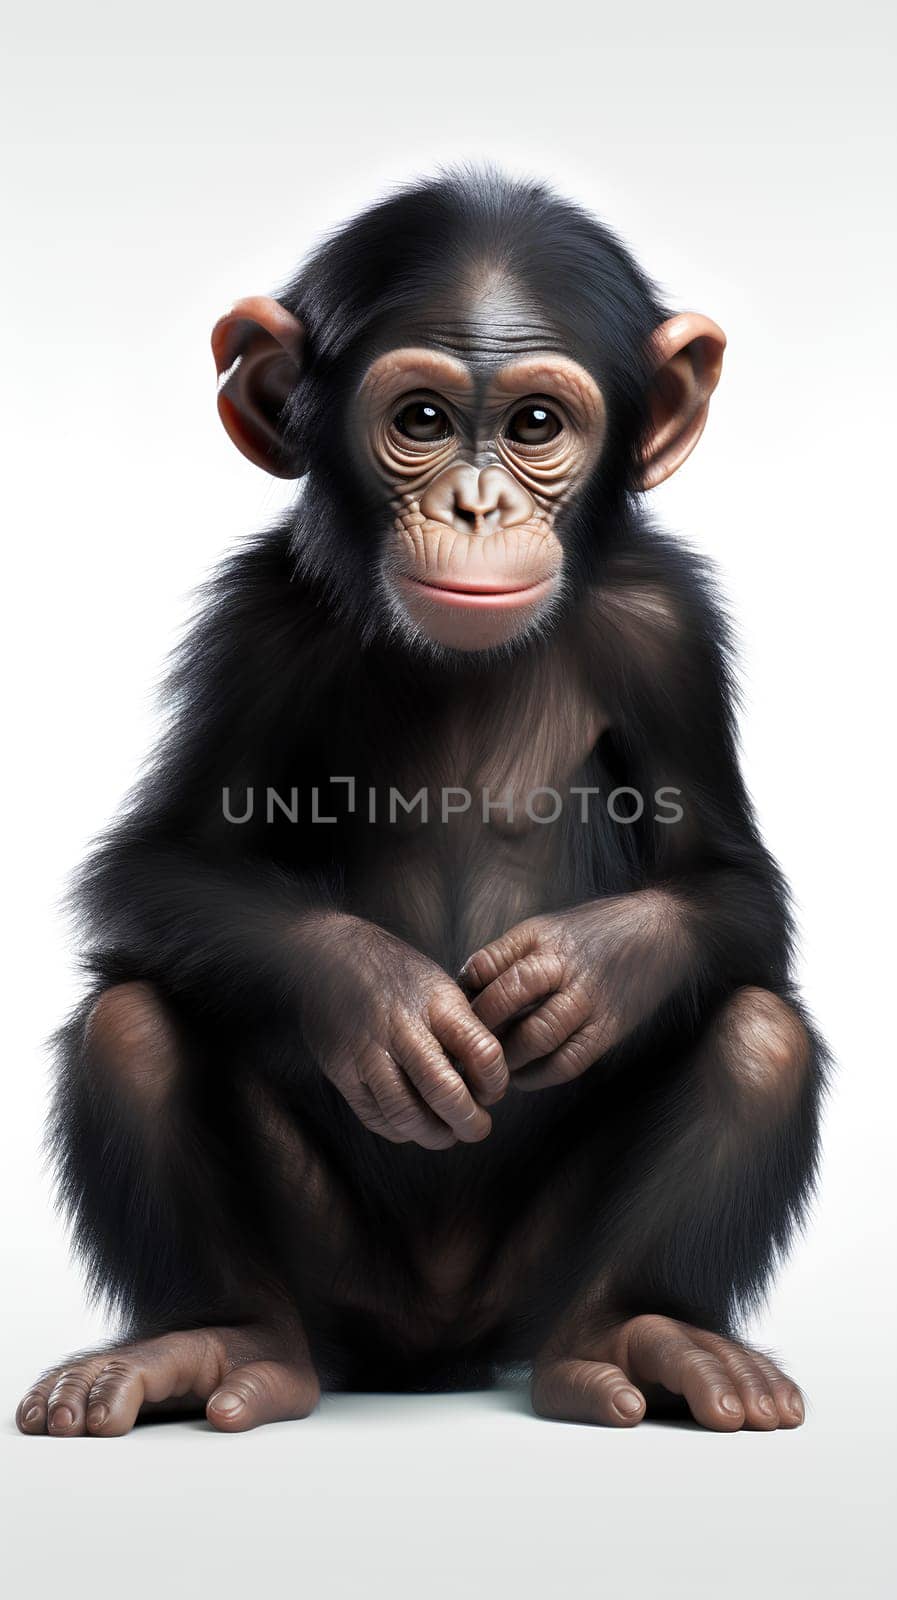 Cute chimpanzee sitting isolated on white background by chrisroll